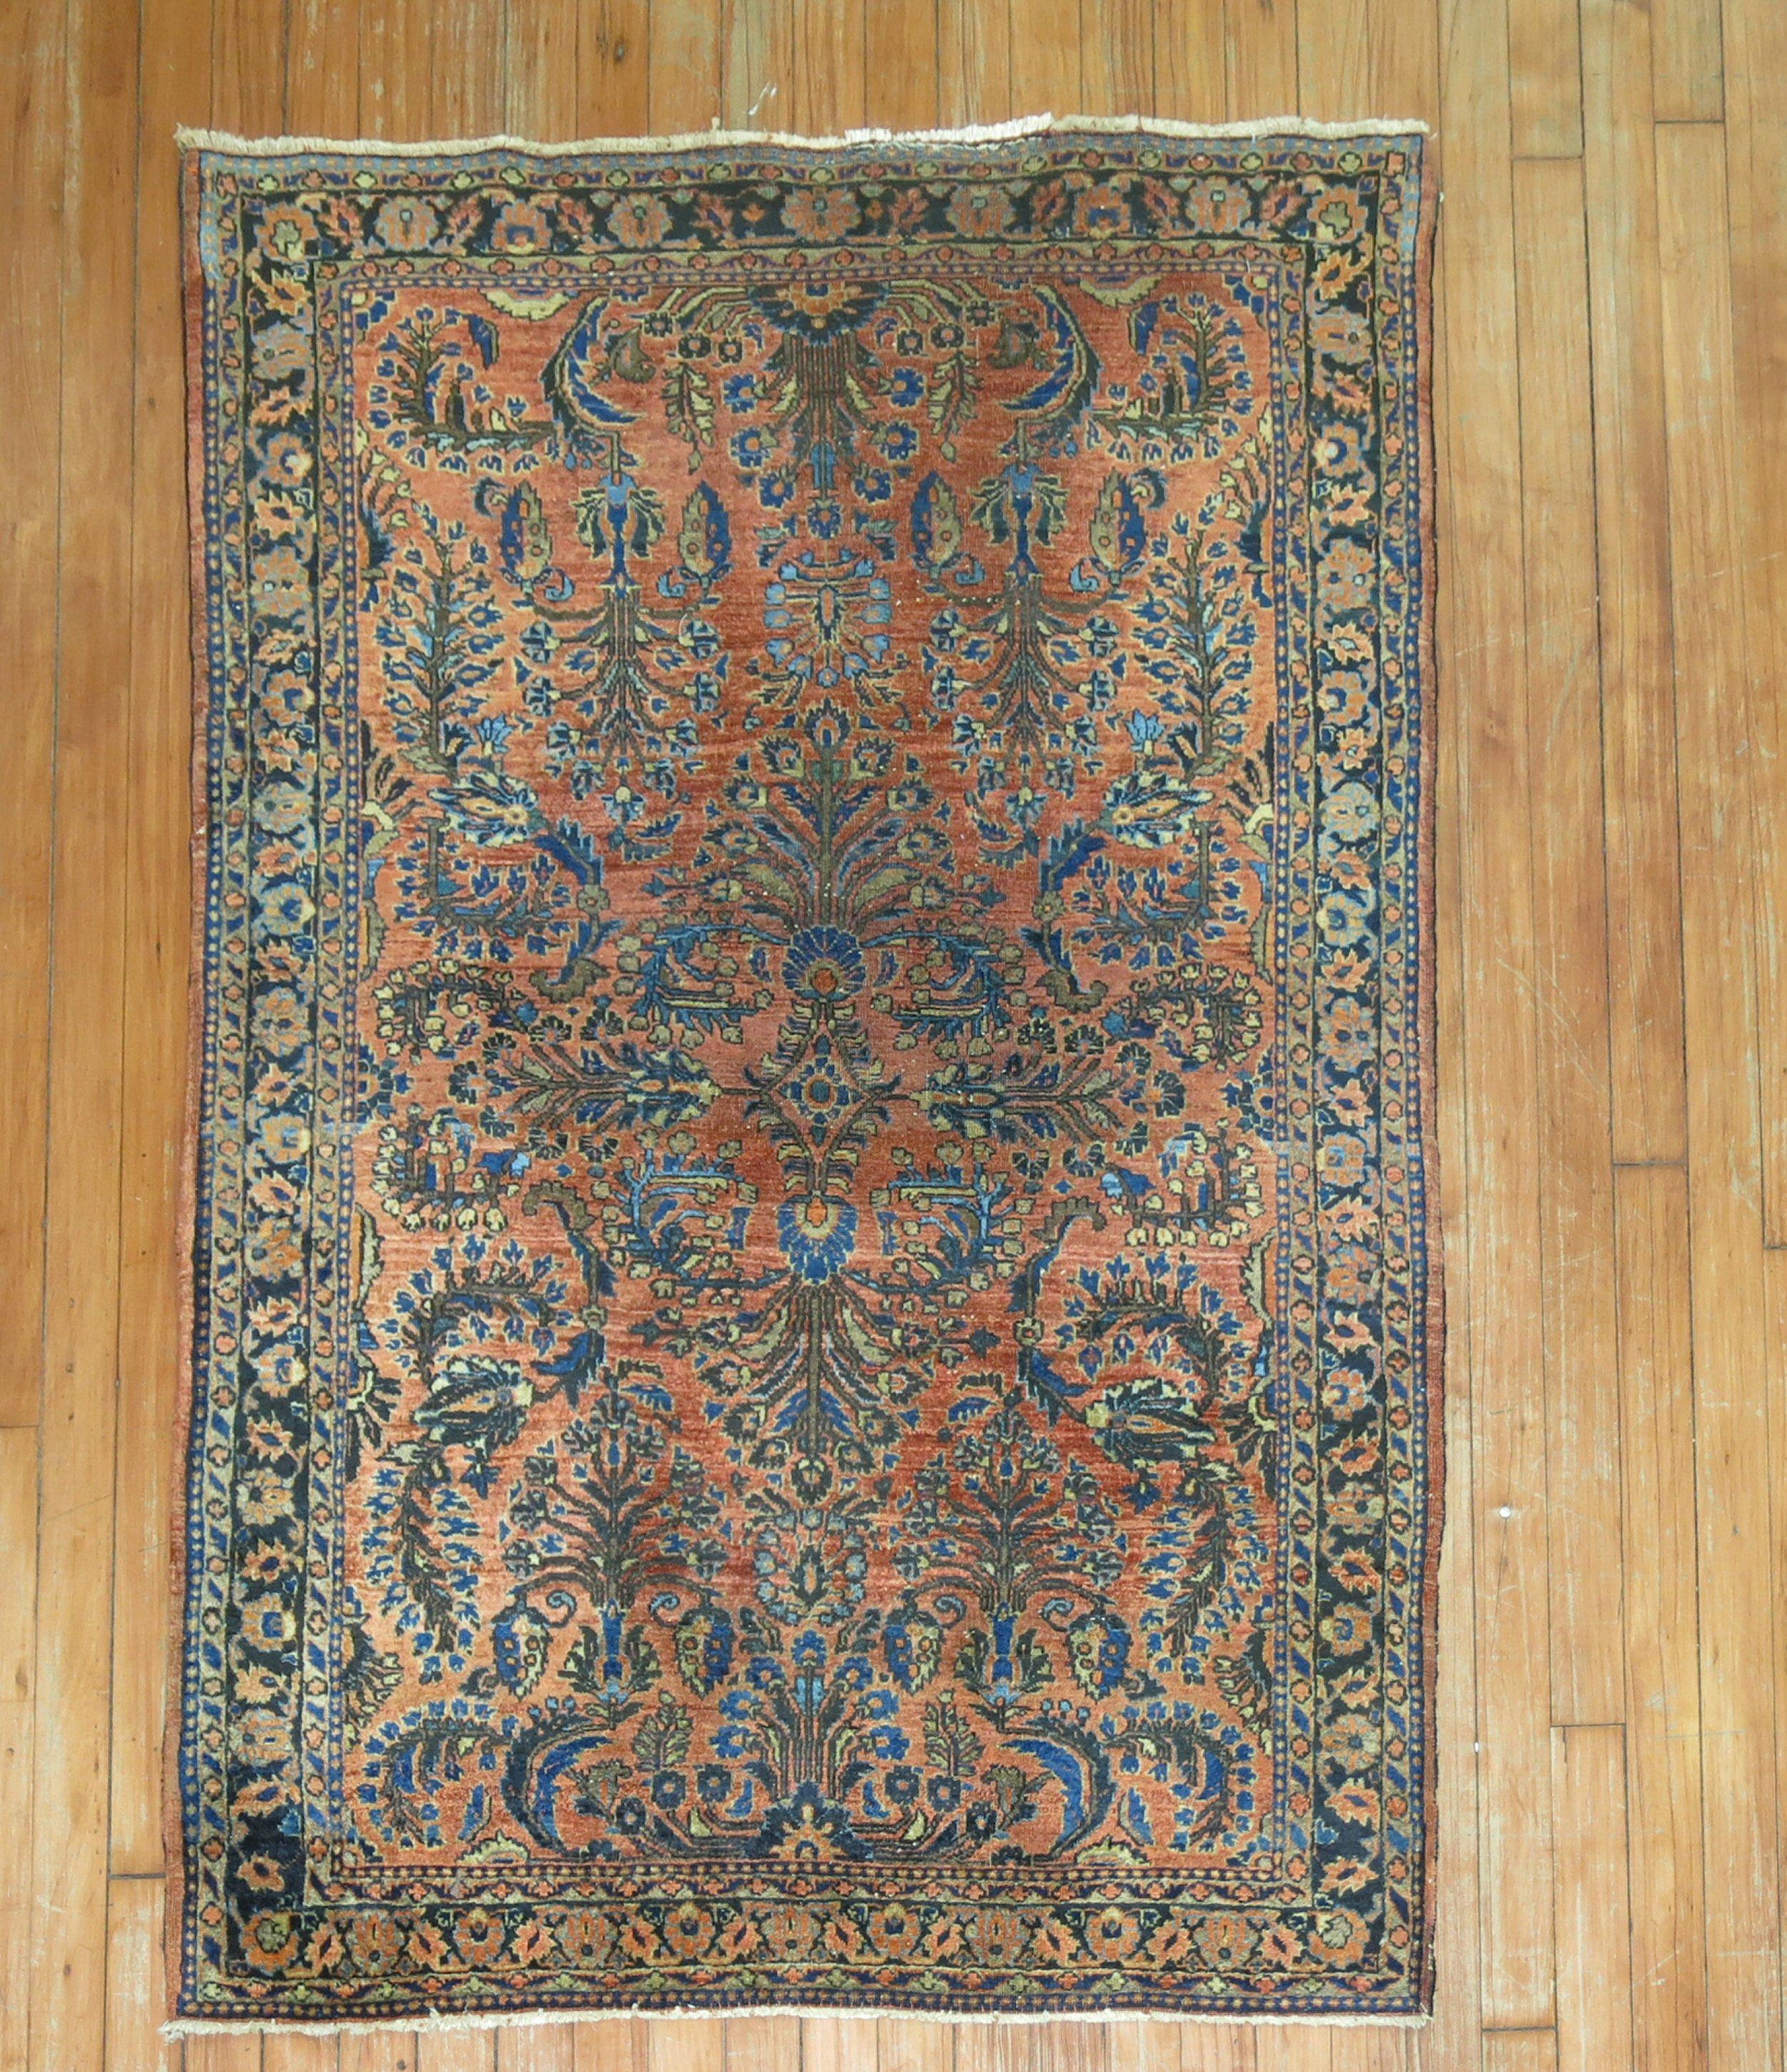 An early 20th century classic Persian Sarouk rug in copper, blue and brown .

Measures: 3'3'' x 4'9”.

